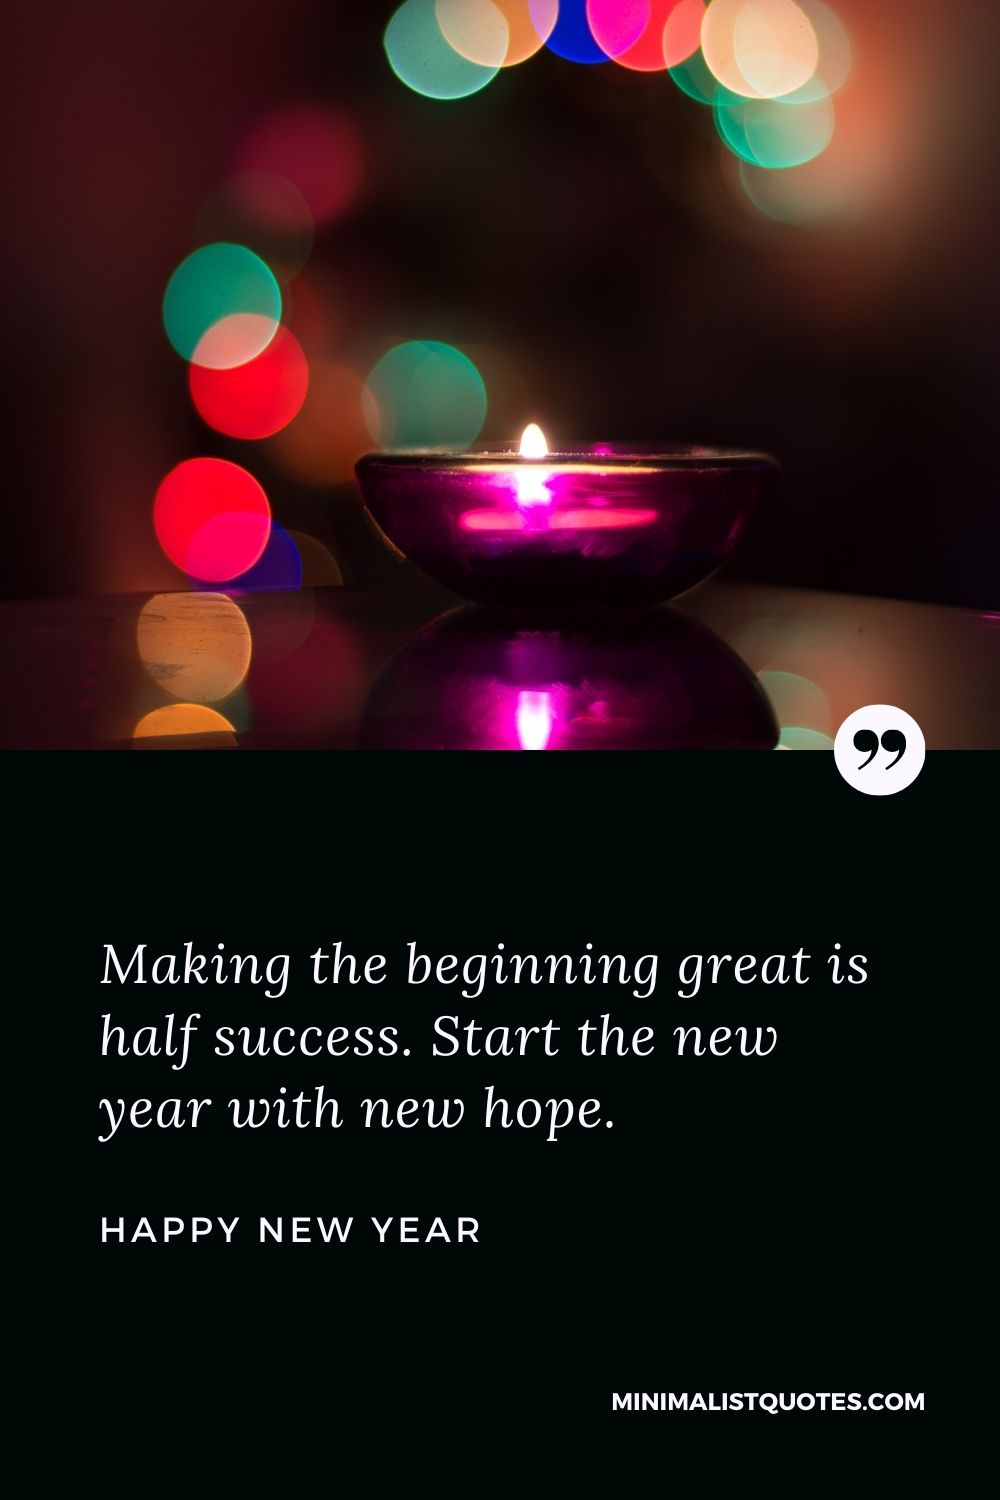 New Year Wish - Making the beginning great is half success. Start the new year with new hope.